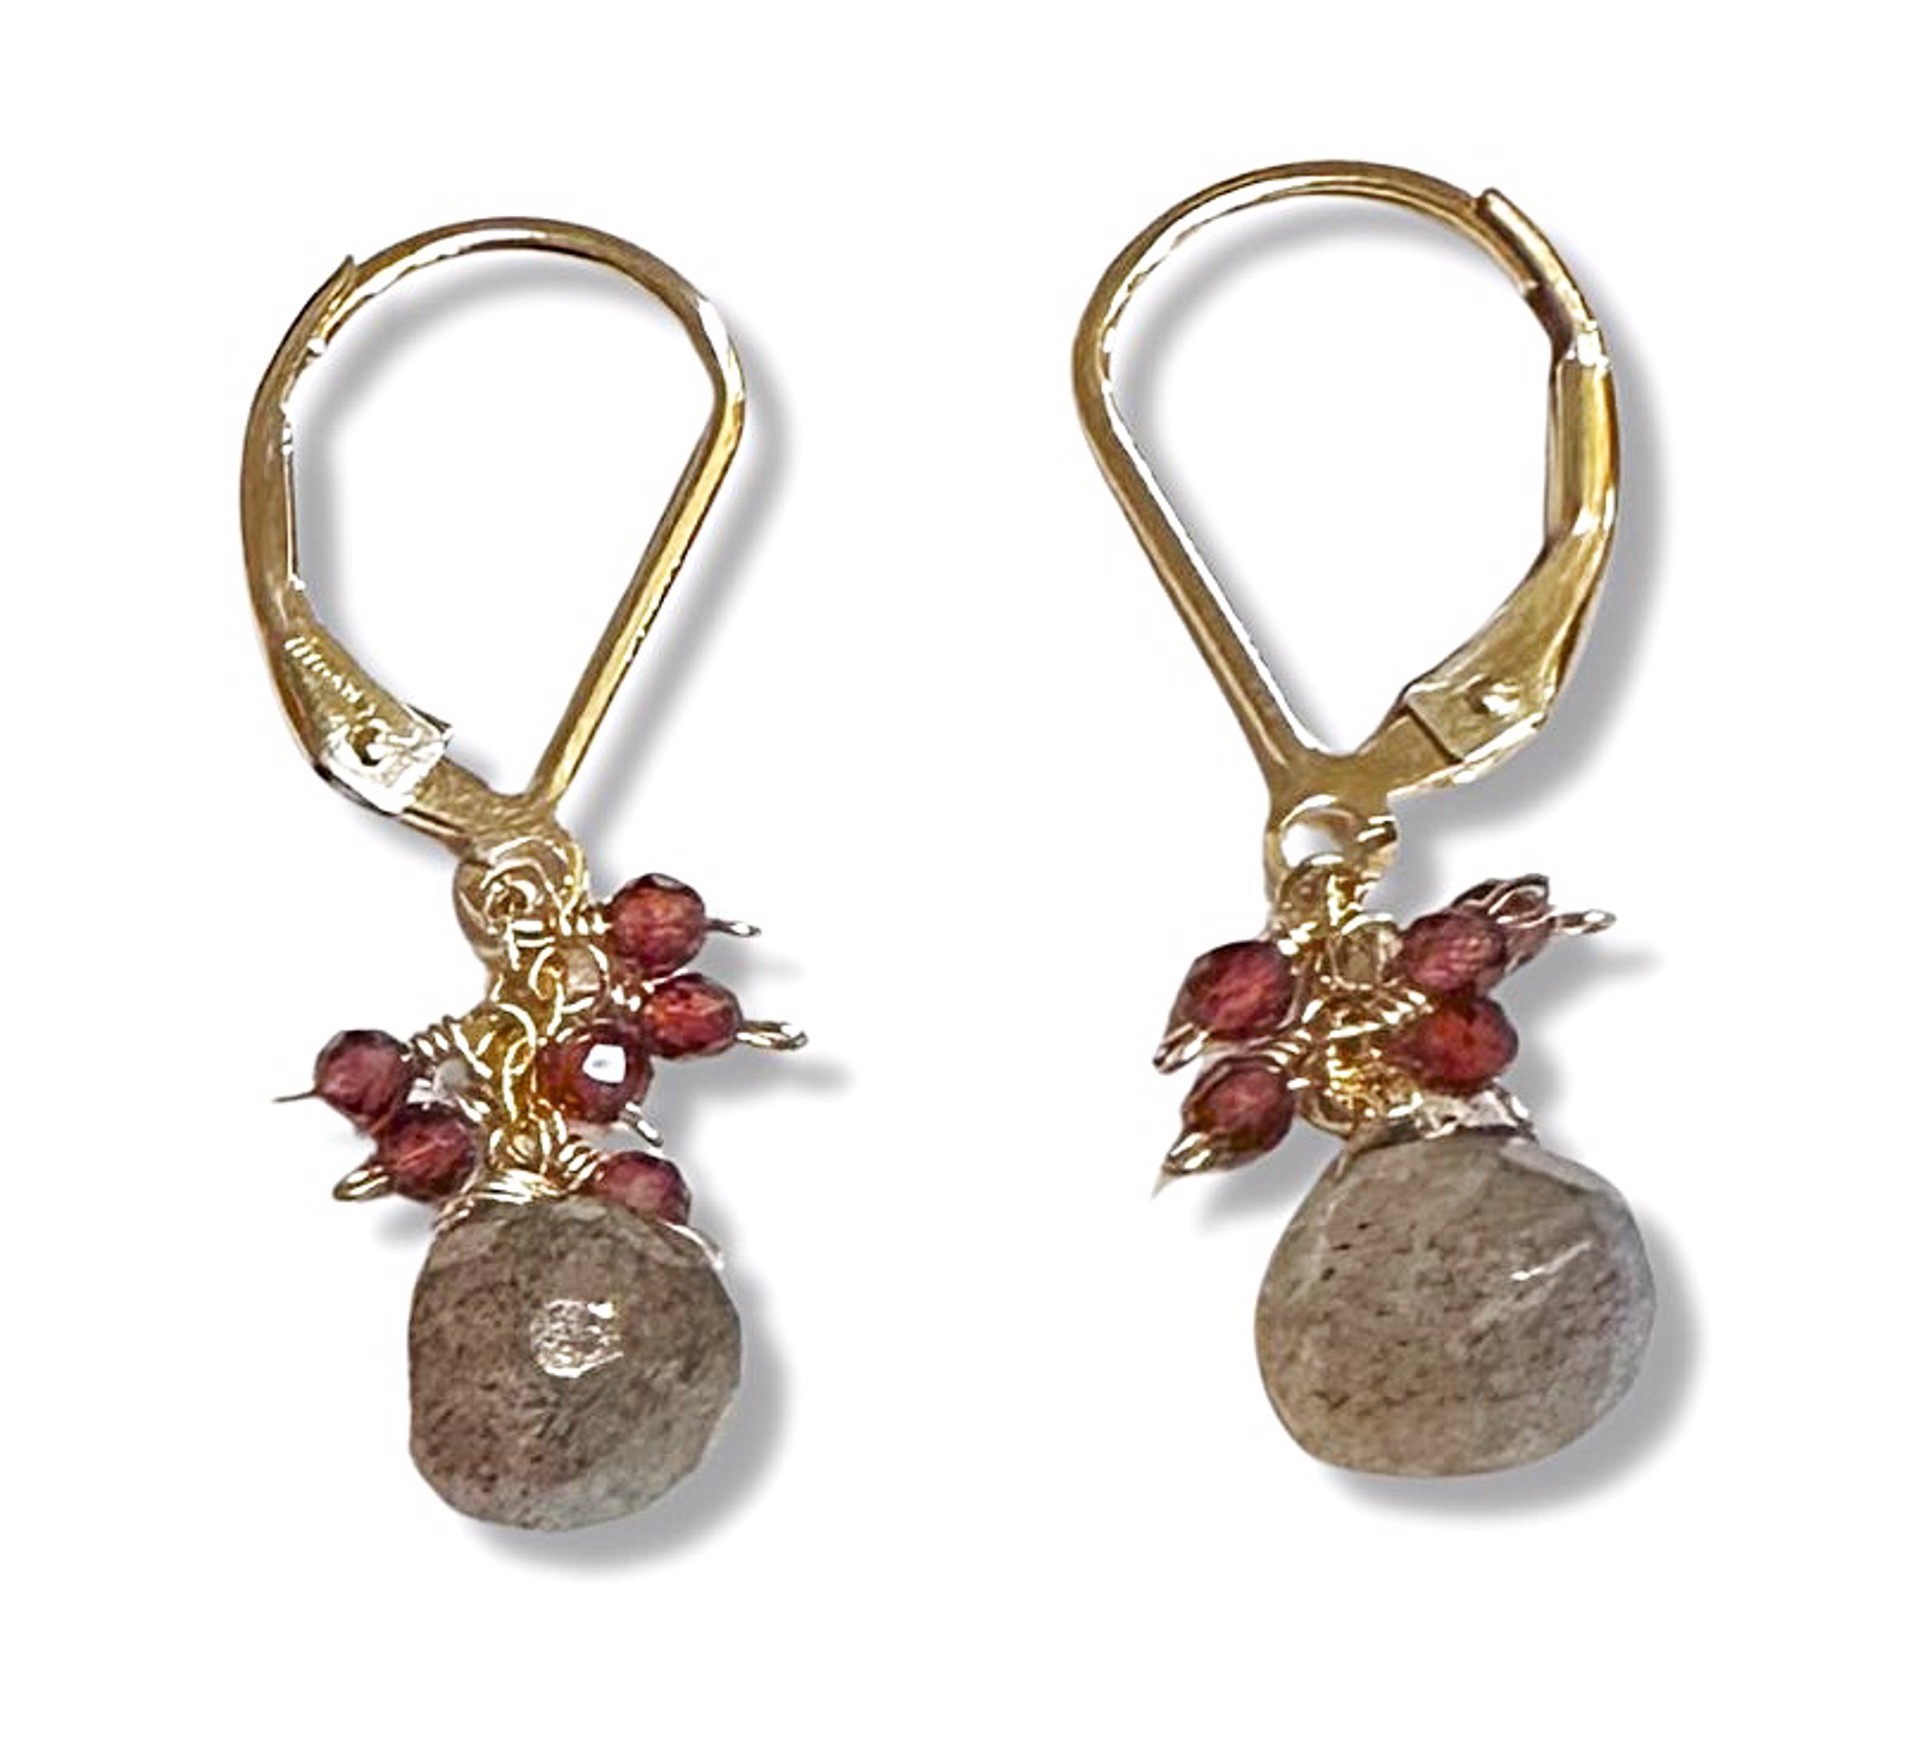 Earrings - Garnet and Labradorite with 14K Gold by Julia Balestracci